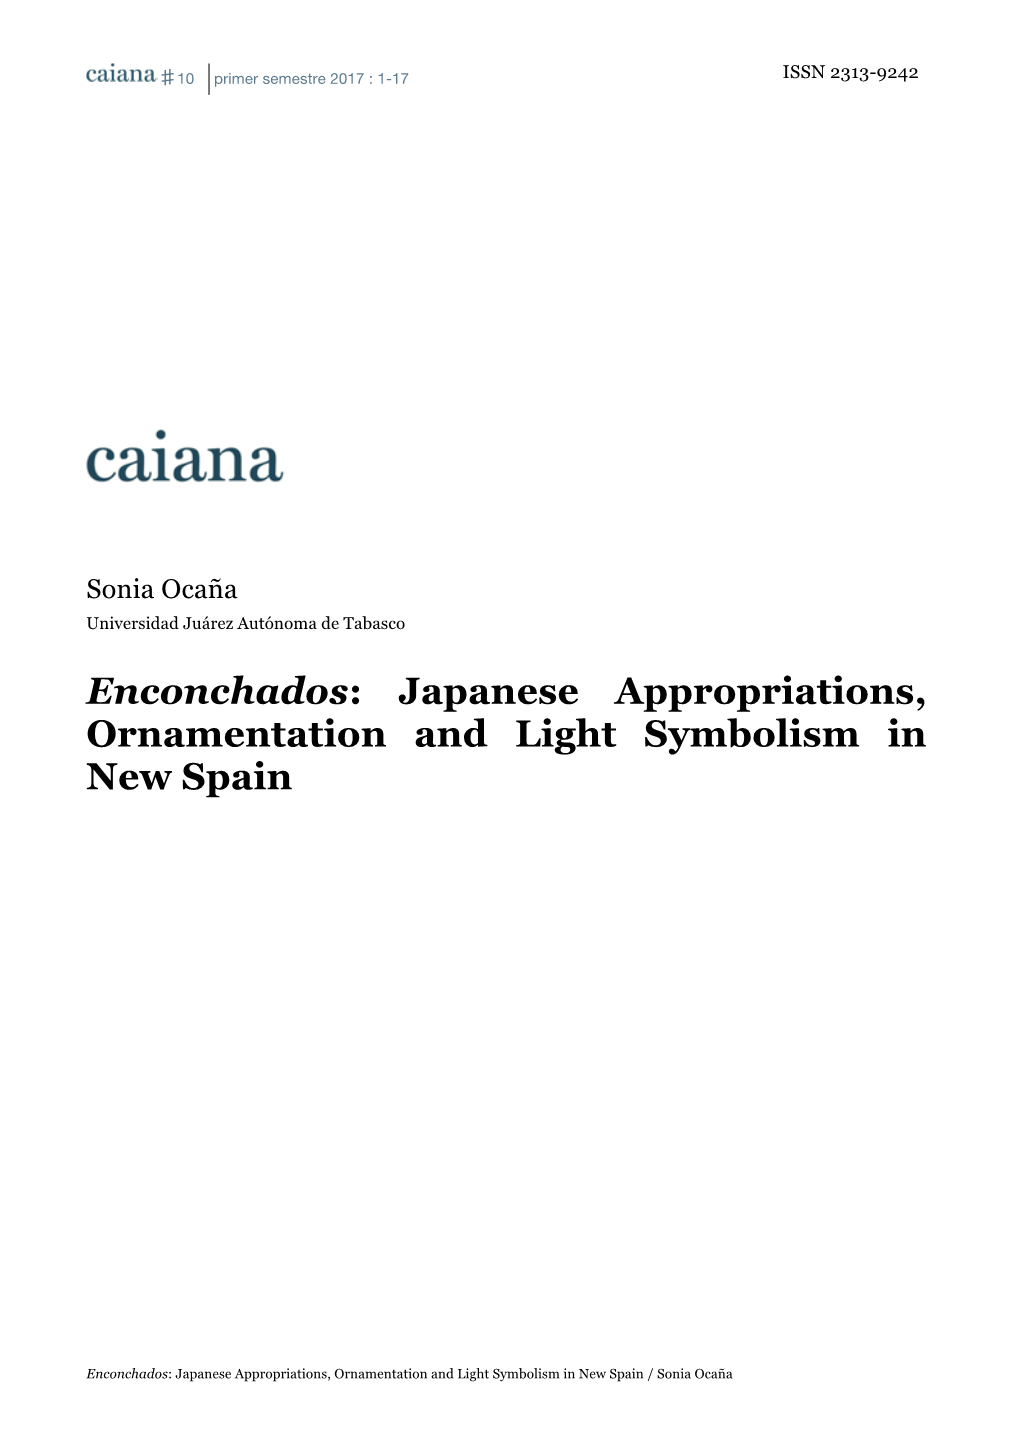 Enconchados: Japanese Appropriations, Ornamentation and Light Symbolism in New Spain